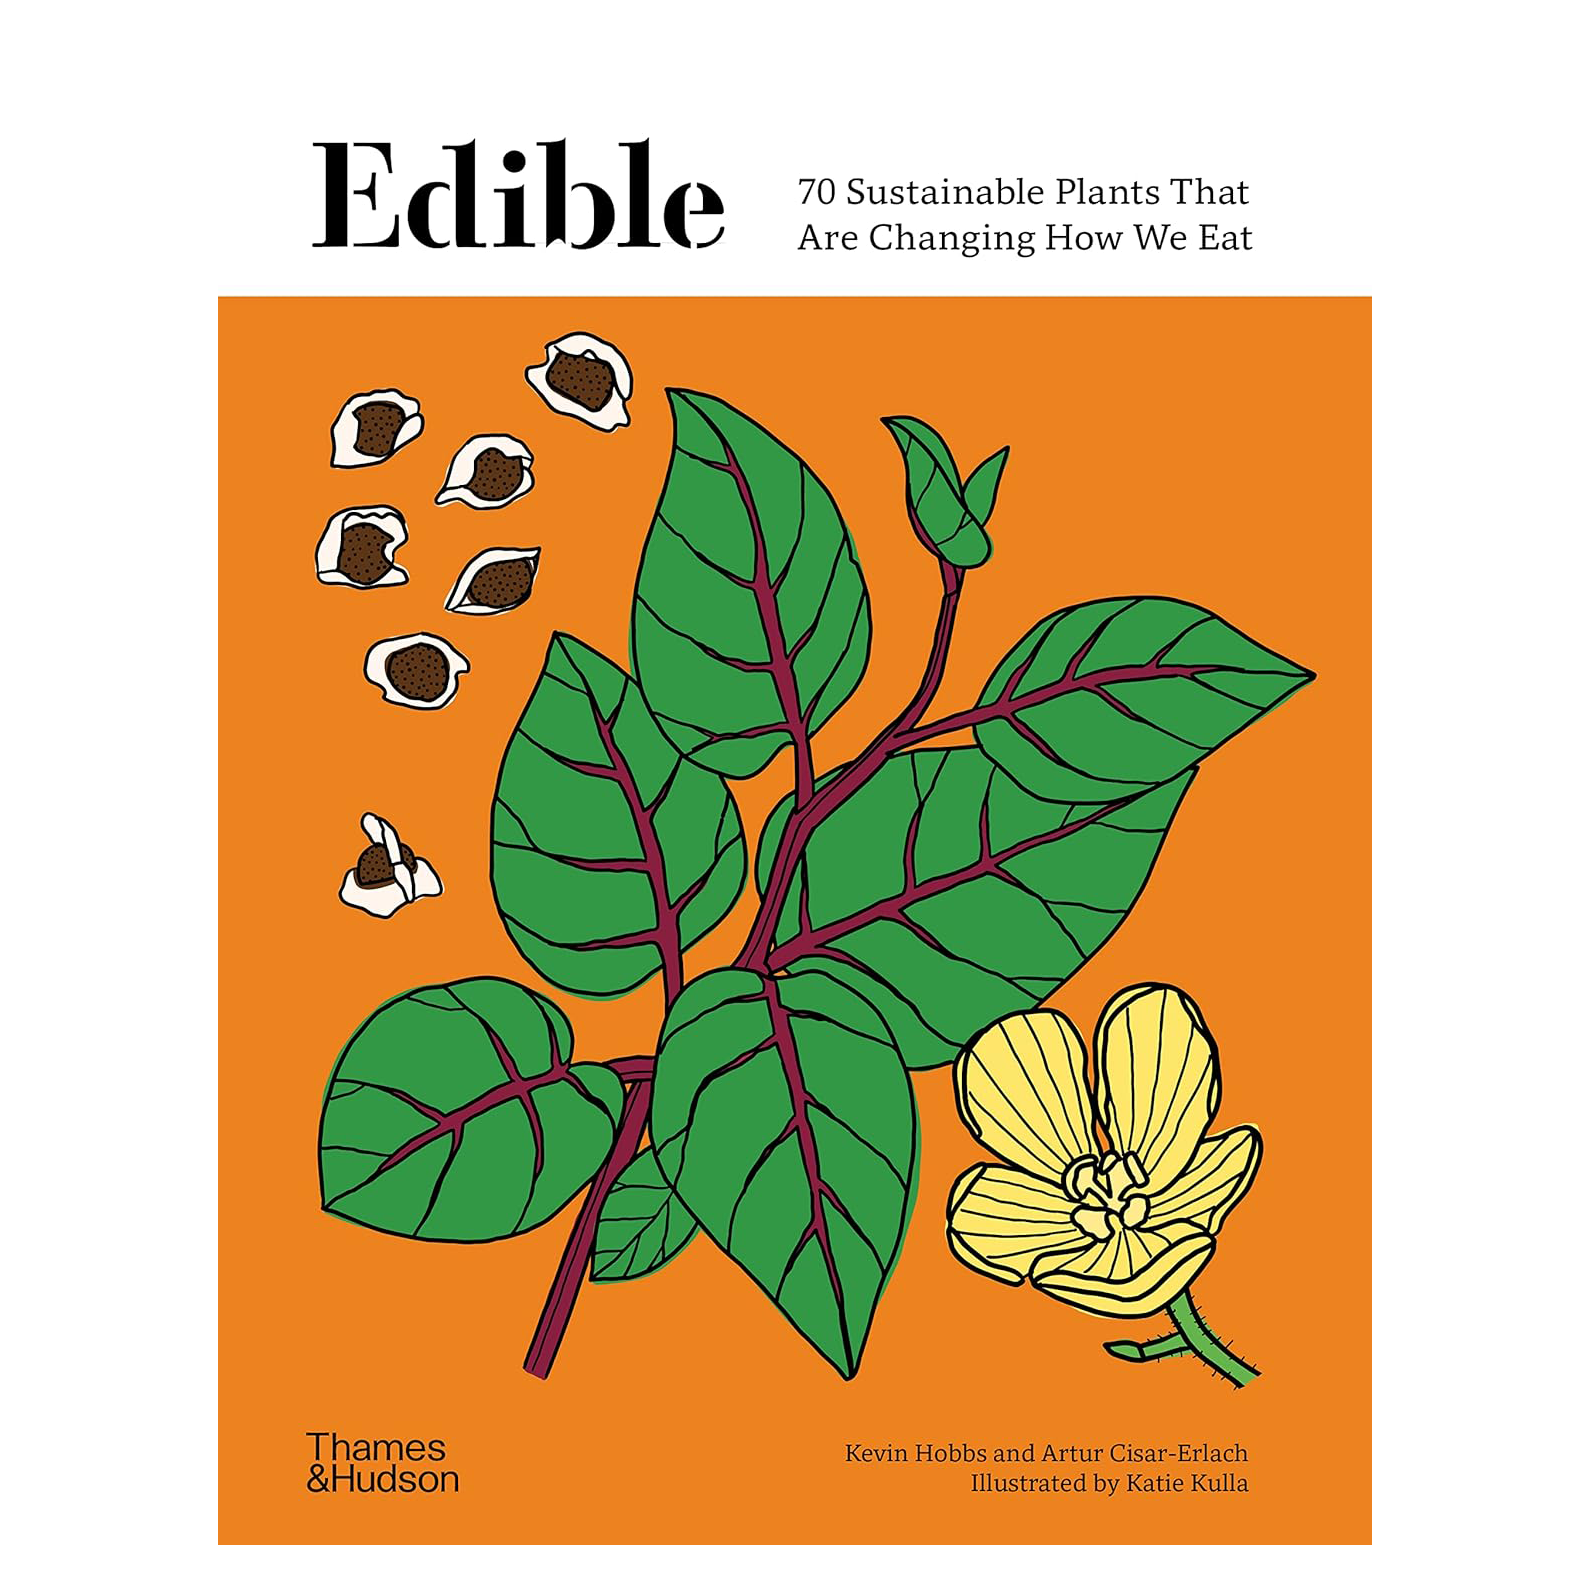 Edible: 70 Sustainable Plants That Are Changing How We Eat